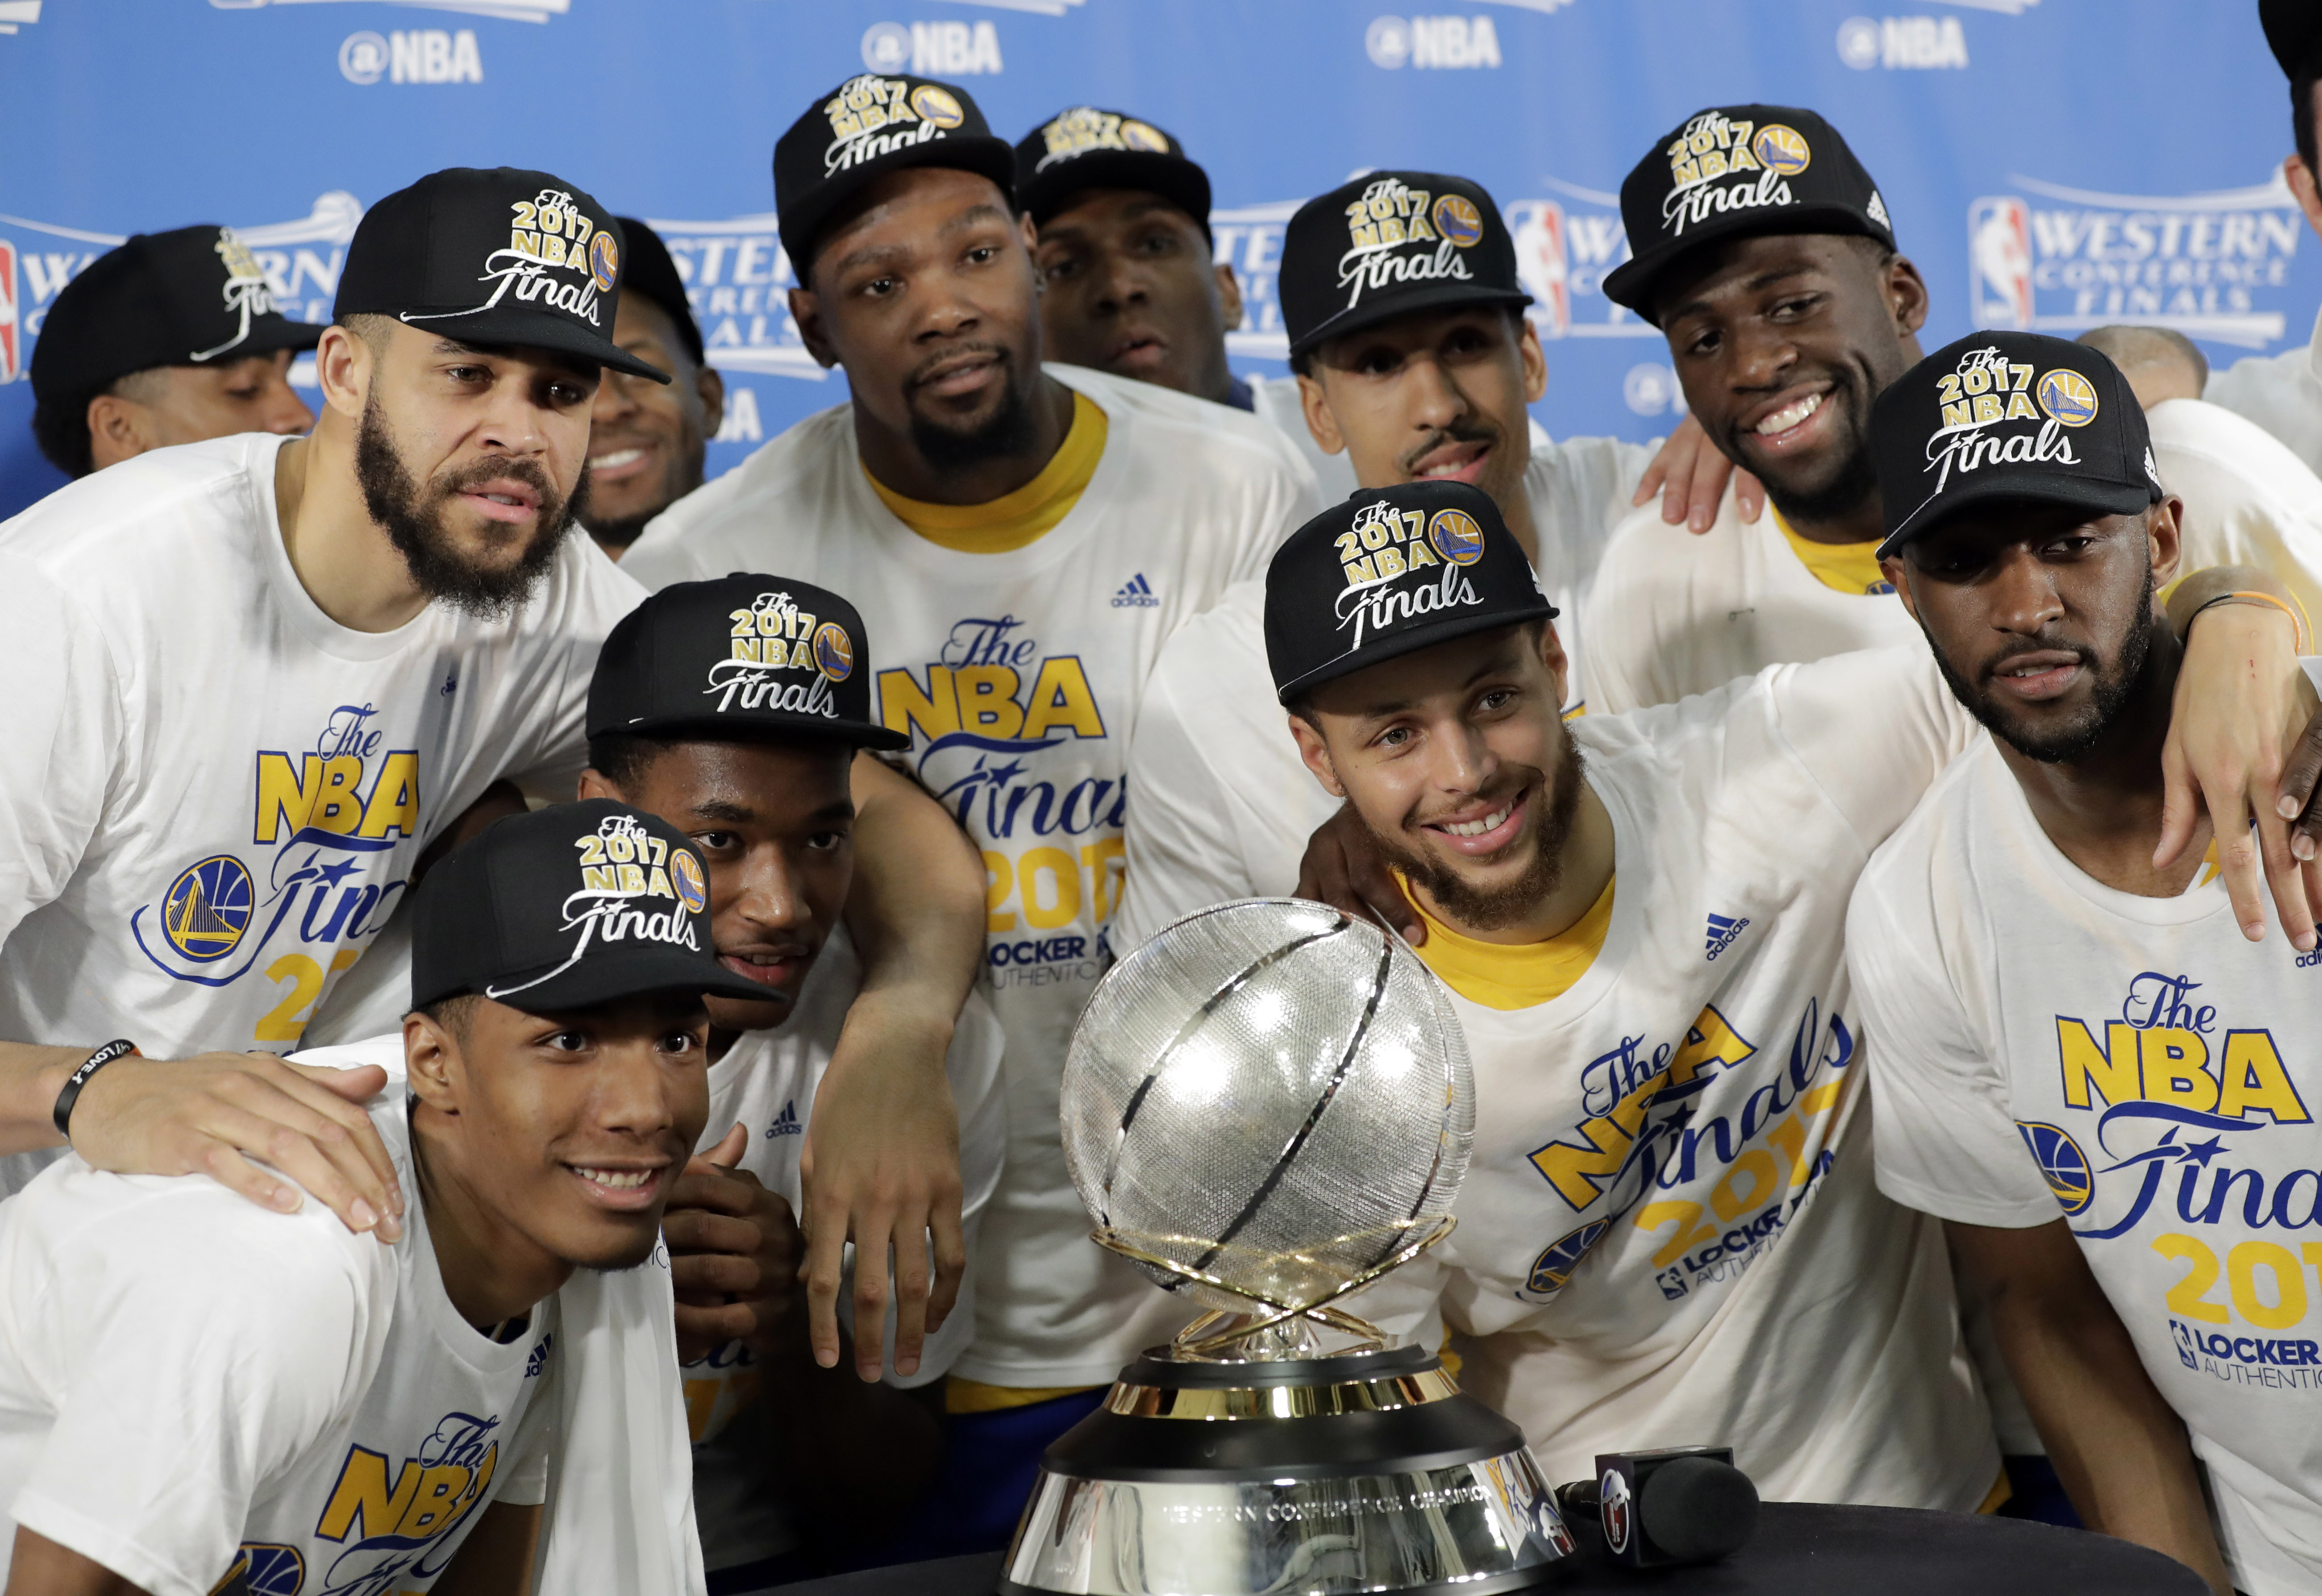 Golden State Warriors' JaVale McGee, top left, Kevin Durant, top center, Stephen Curry, center right, and Draymond Green, top right, join the rest of their team as they pose with the trophy after their 129-115 win over the San Antonio Spurs in Game 4 of the NBA basketball Western Conference finals, Monday, May 22, 2017, in San Antonio. (AP Photo/Eric Gay)